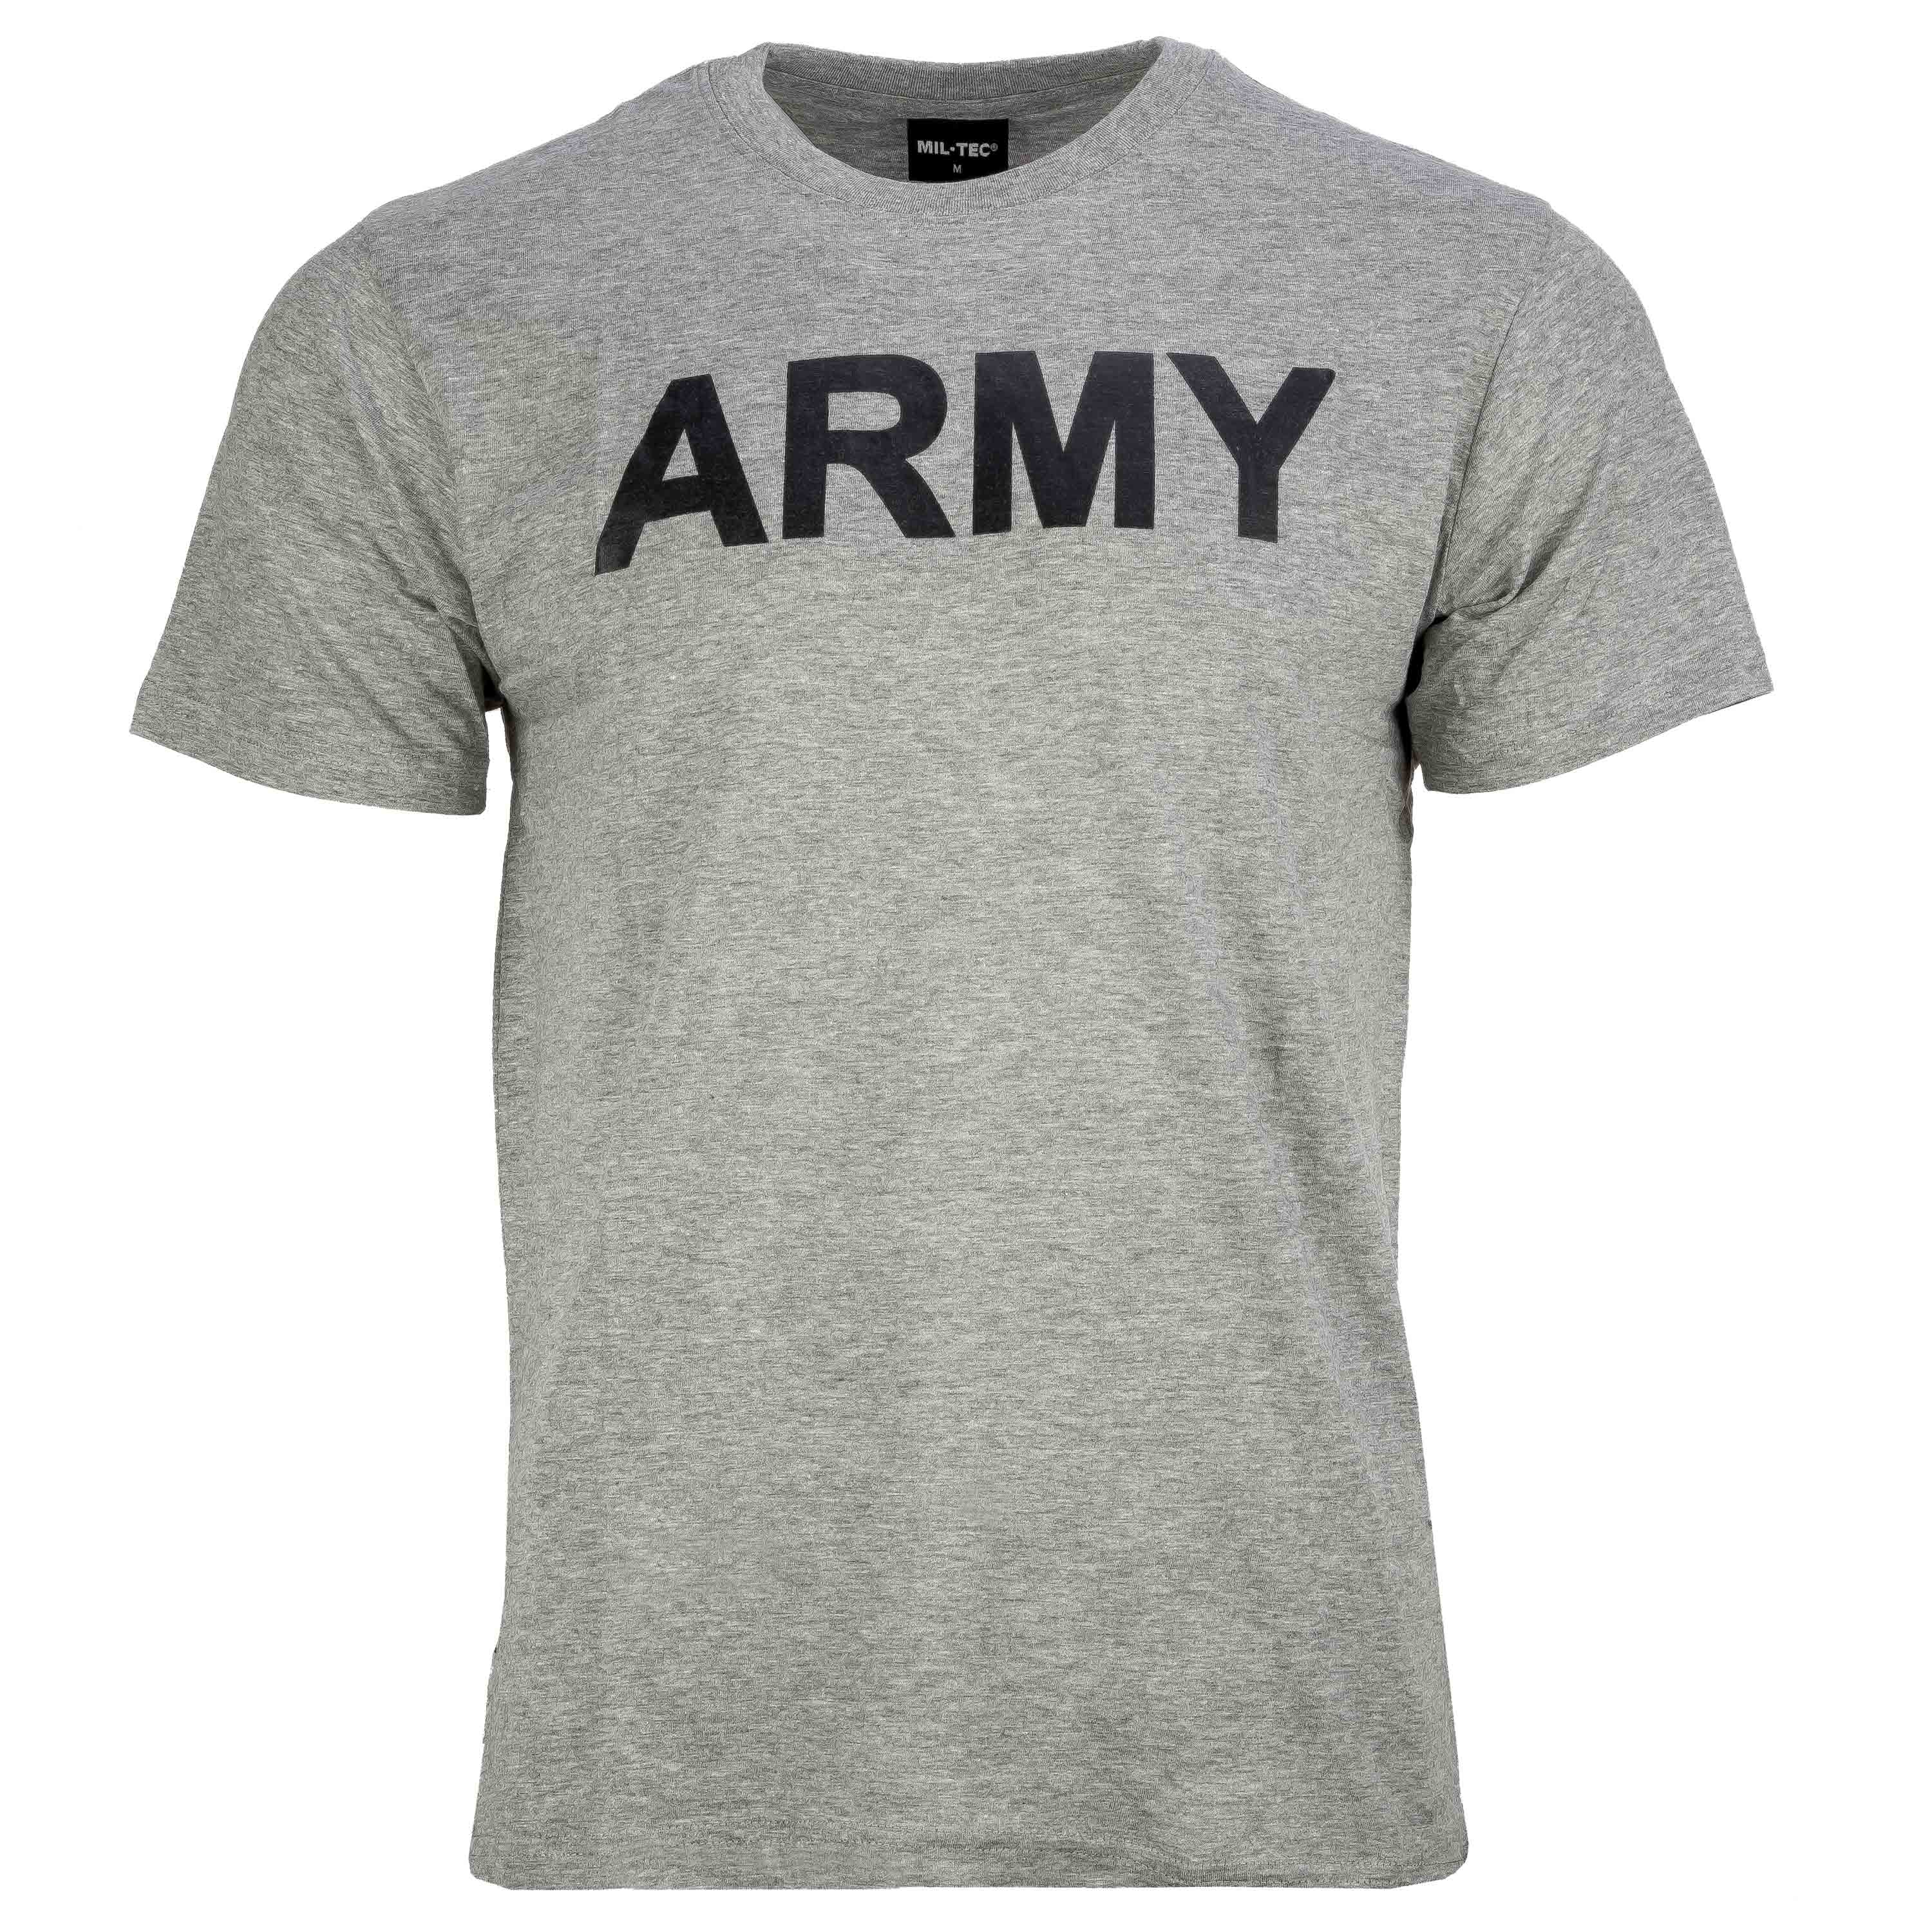 Purchase the T-Shirt ARMY gray by ASMC